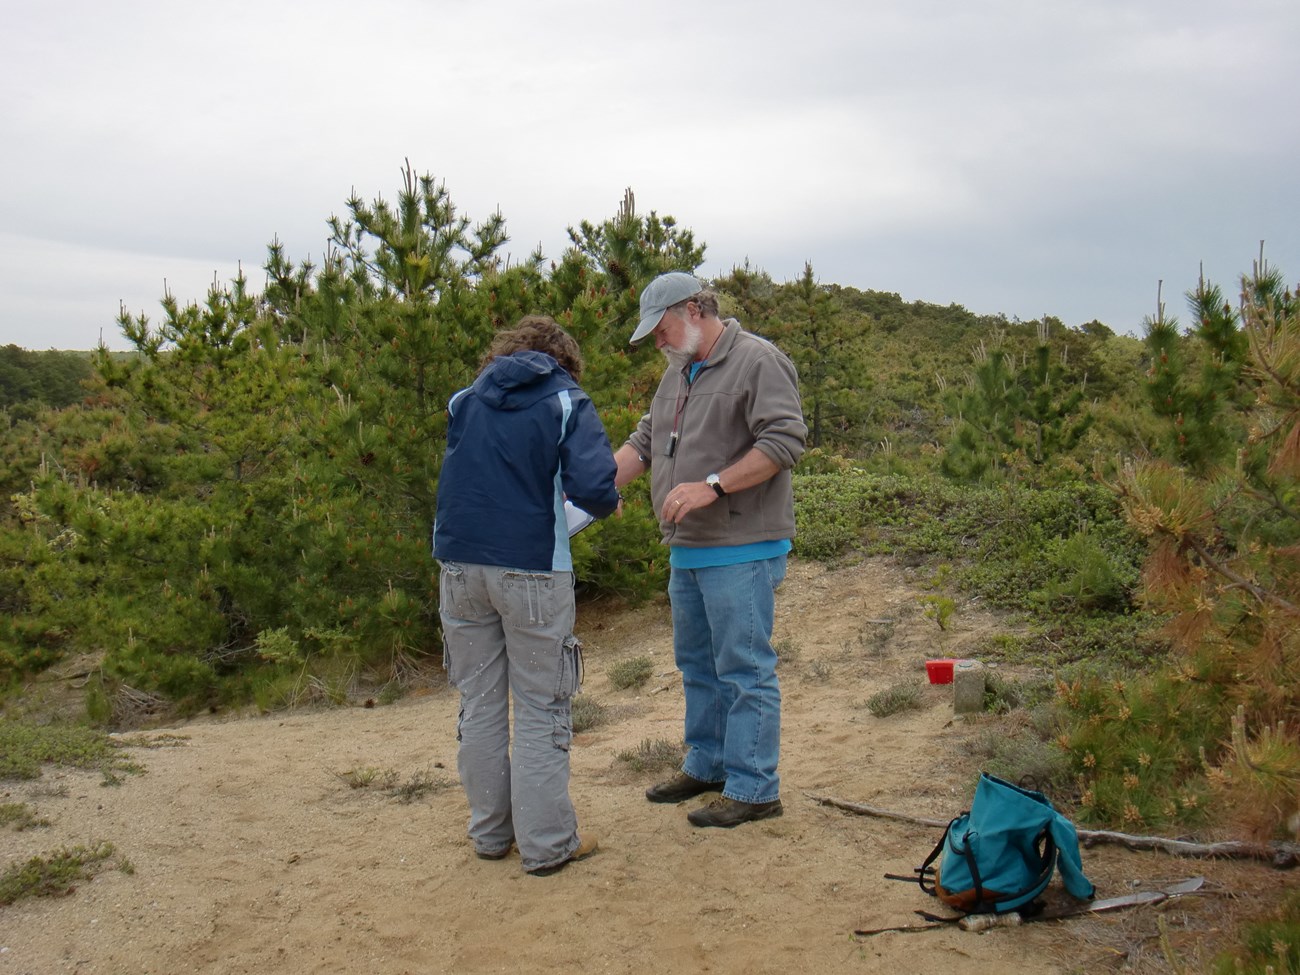 Pete august and crew member record data on a dune